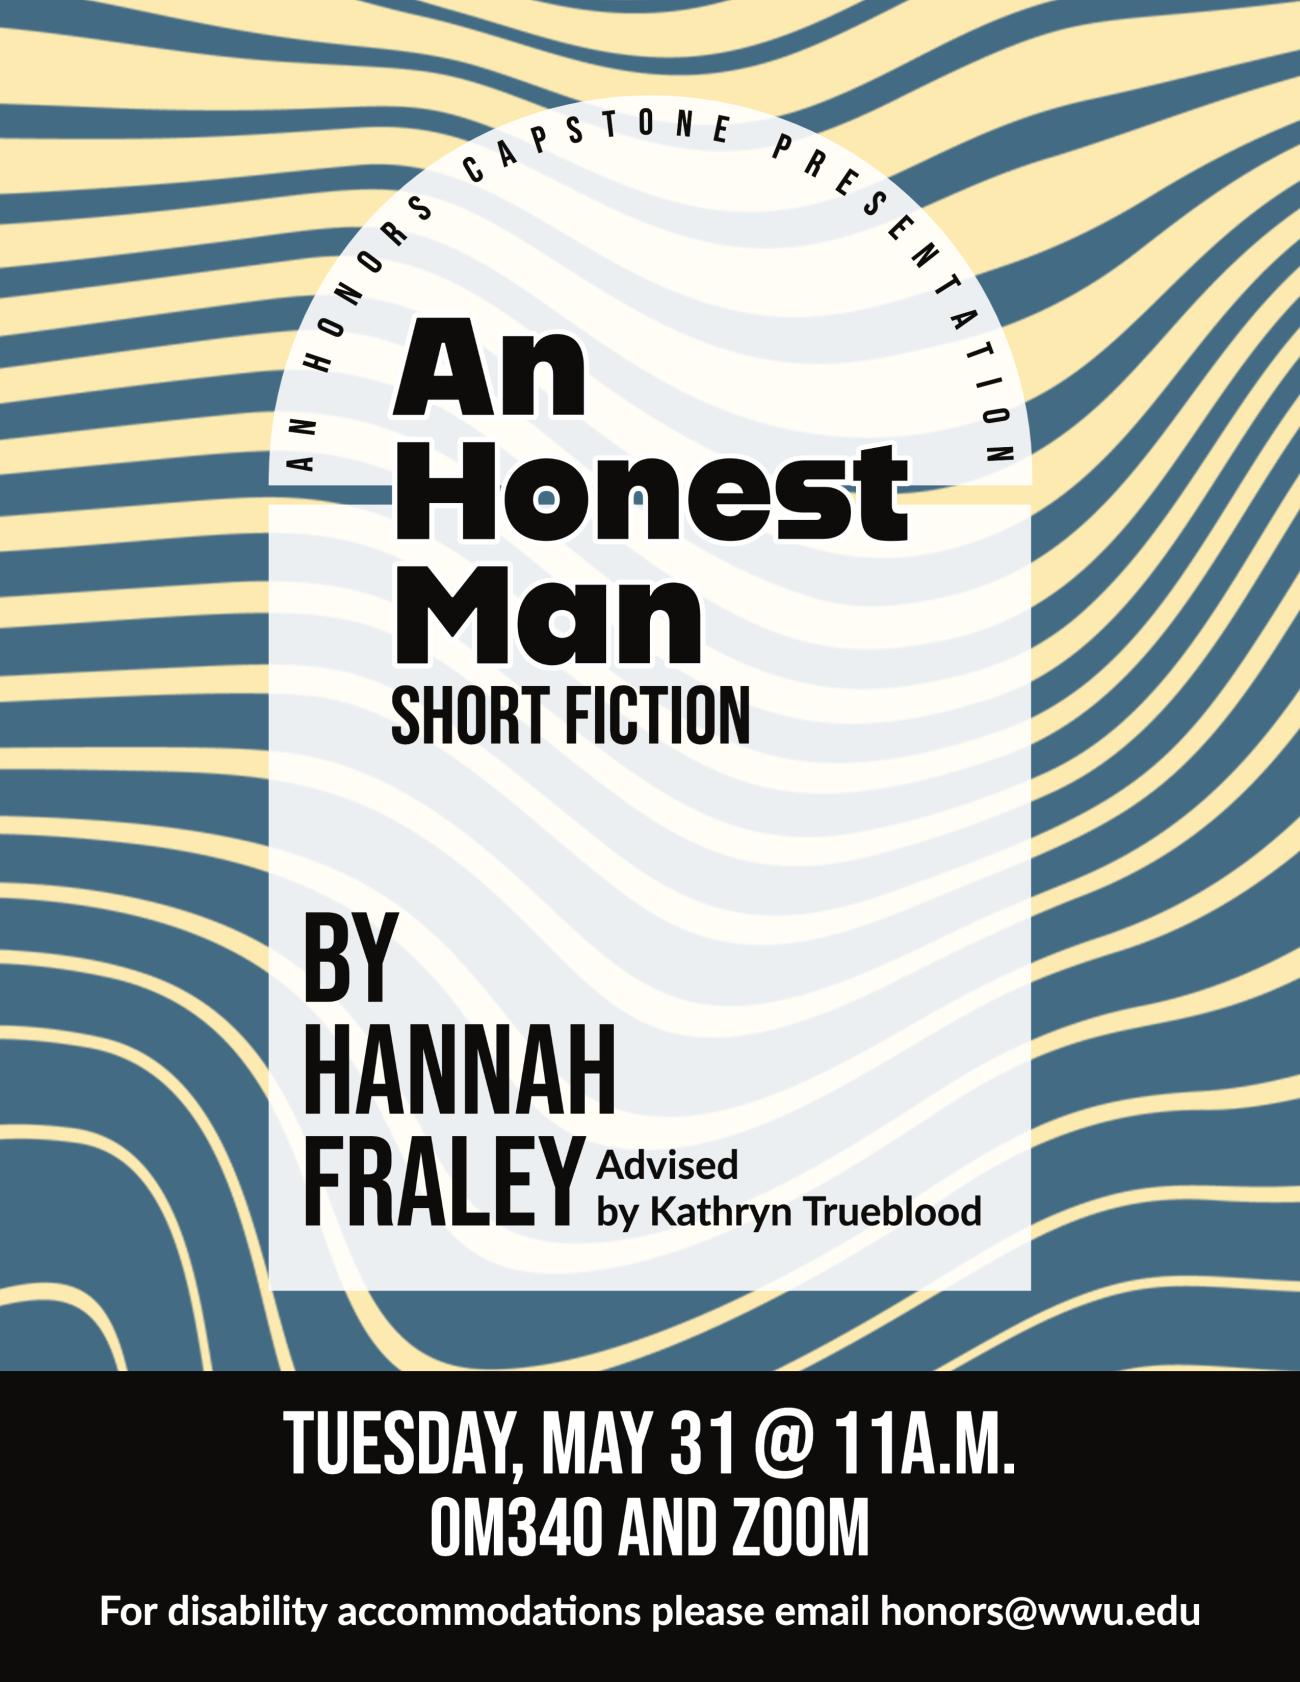 Light yellow and blue striped and warped background containing semi-transparent white square.  Text reads “An Honors Capstone Presentation.  An Honest Man: Short Fiction by Hannah Fraley, advised by Kathryn Trueblood.  Tuesday, May 31 at 11am in OM340 and Zoom.  For disability accommodations please email honors@wwu.edu."